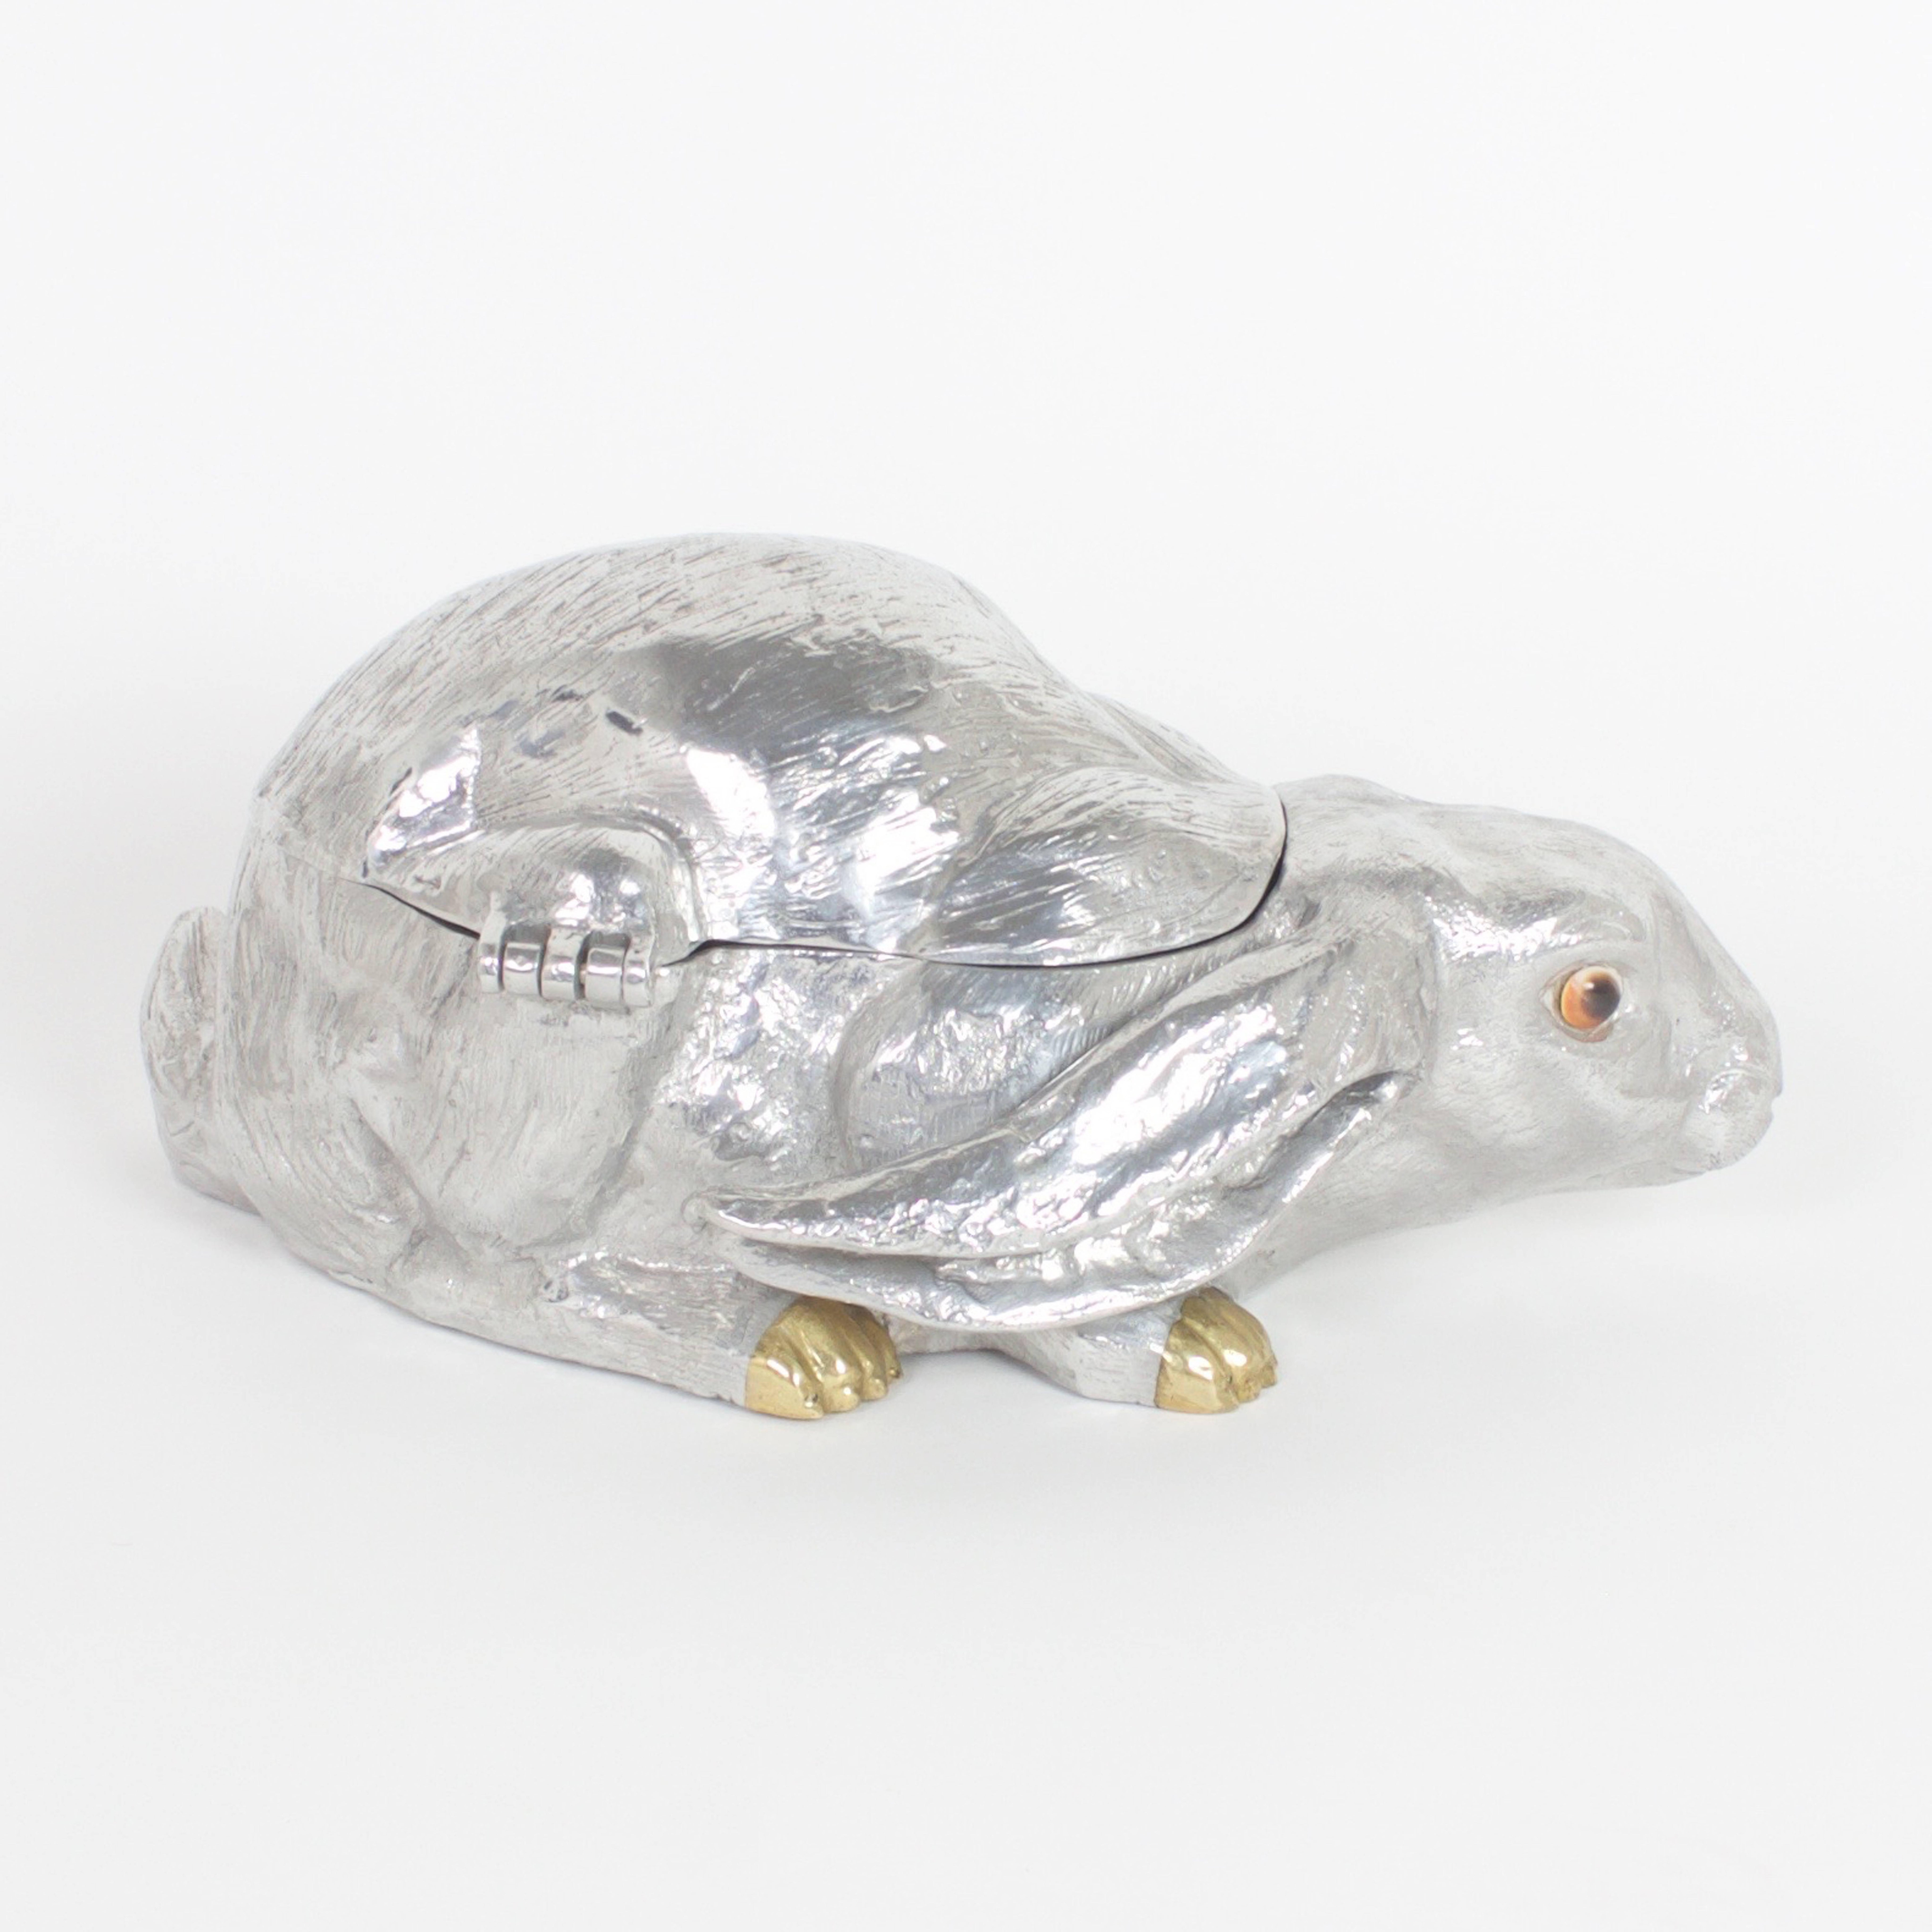 Modernist cast and polished aluminum rabbit with brass feet, stone eyes and a sneaky expression. Having a hinged lid that opens to reveal the ice storage compartment. Signed on the bottom Arthur Court 1986.

.
 